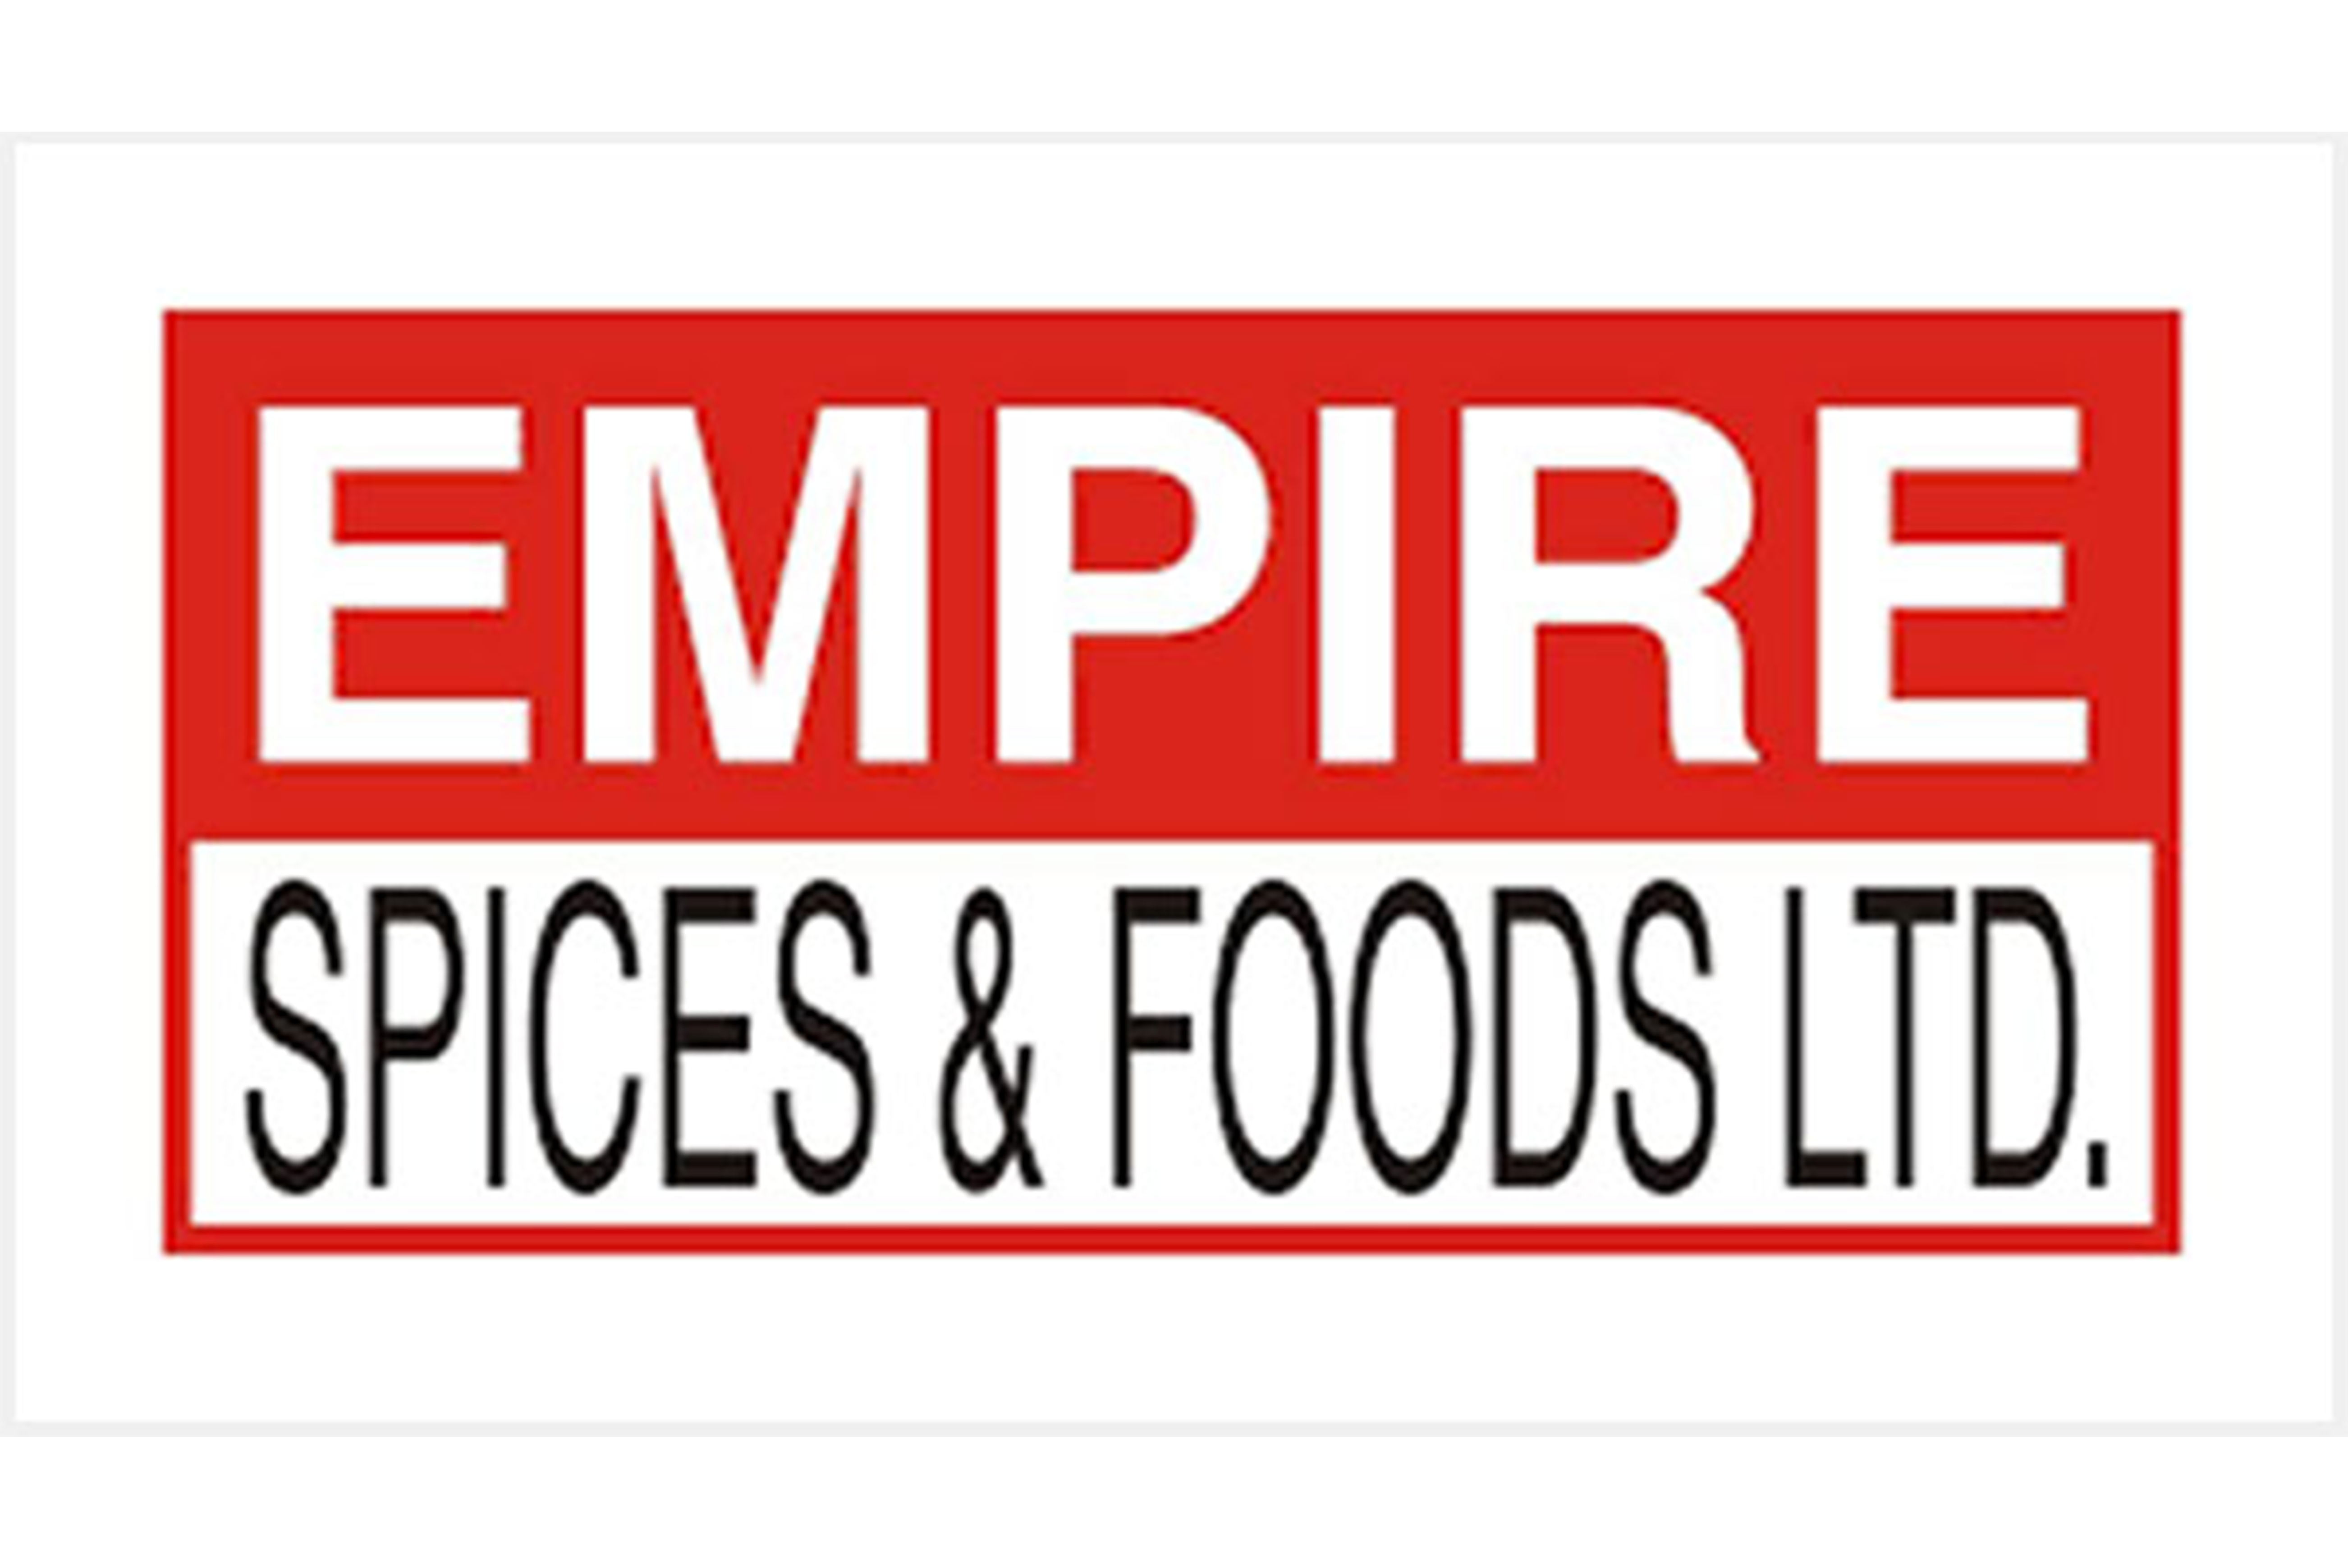 EMPIRE SPICES & FOODS LTD.